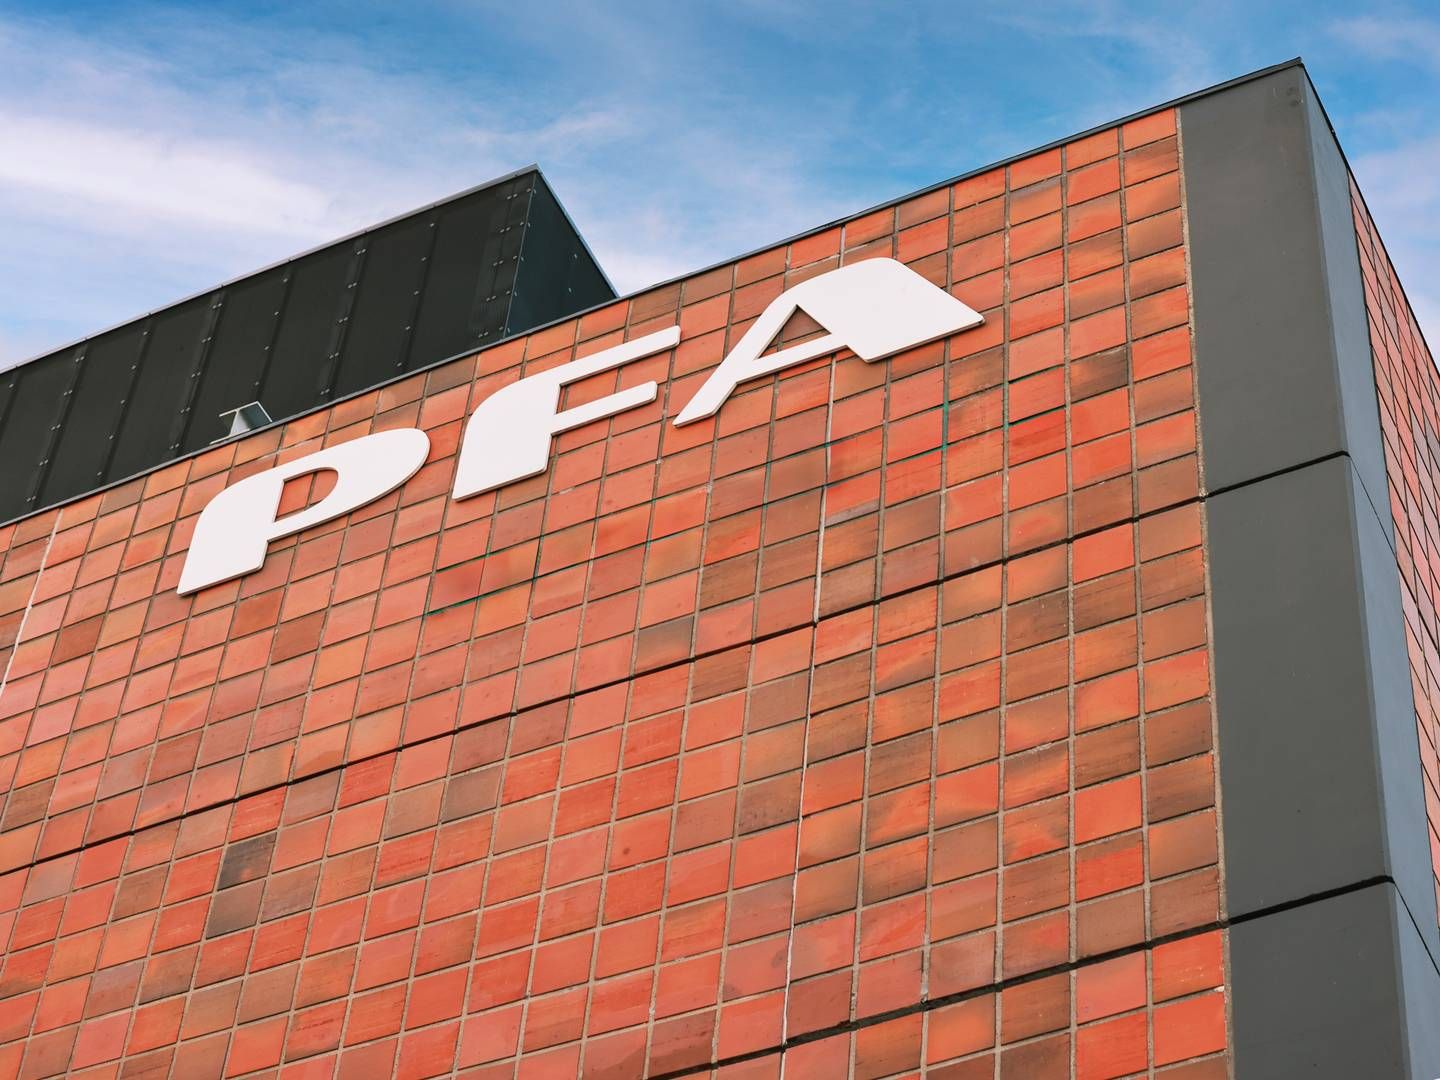 PFA's Head of Equities is stepping down after six years. | Photo: Pfa